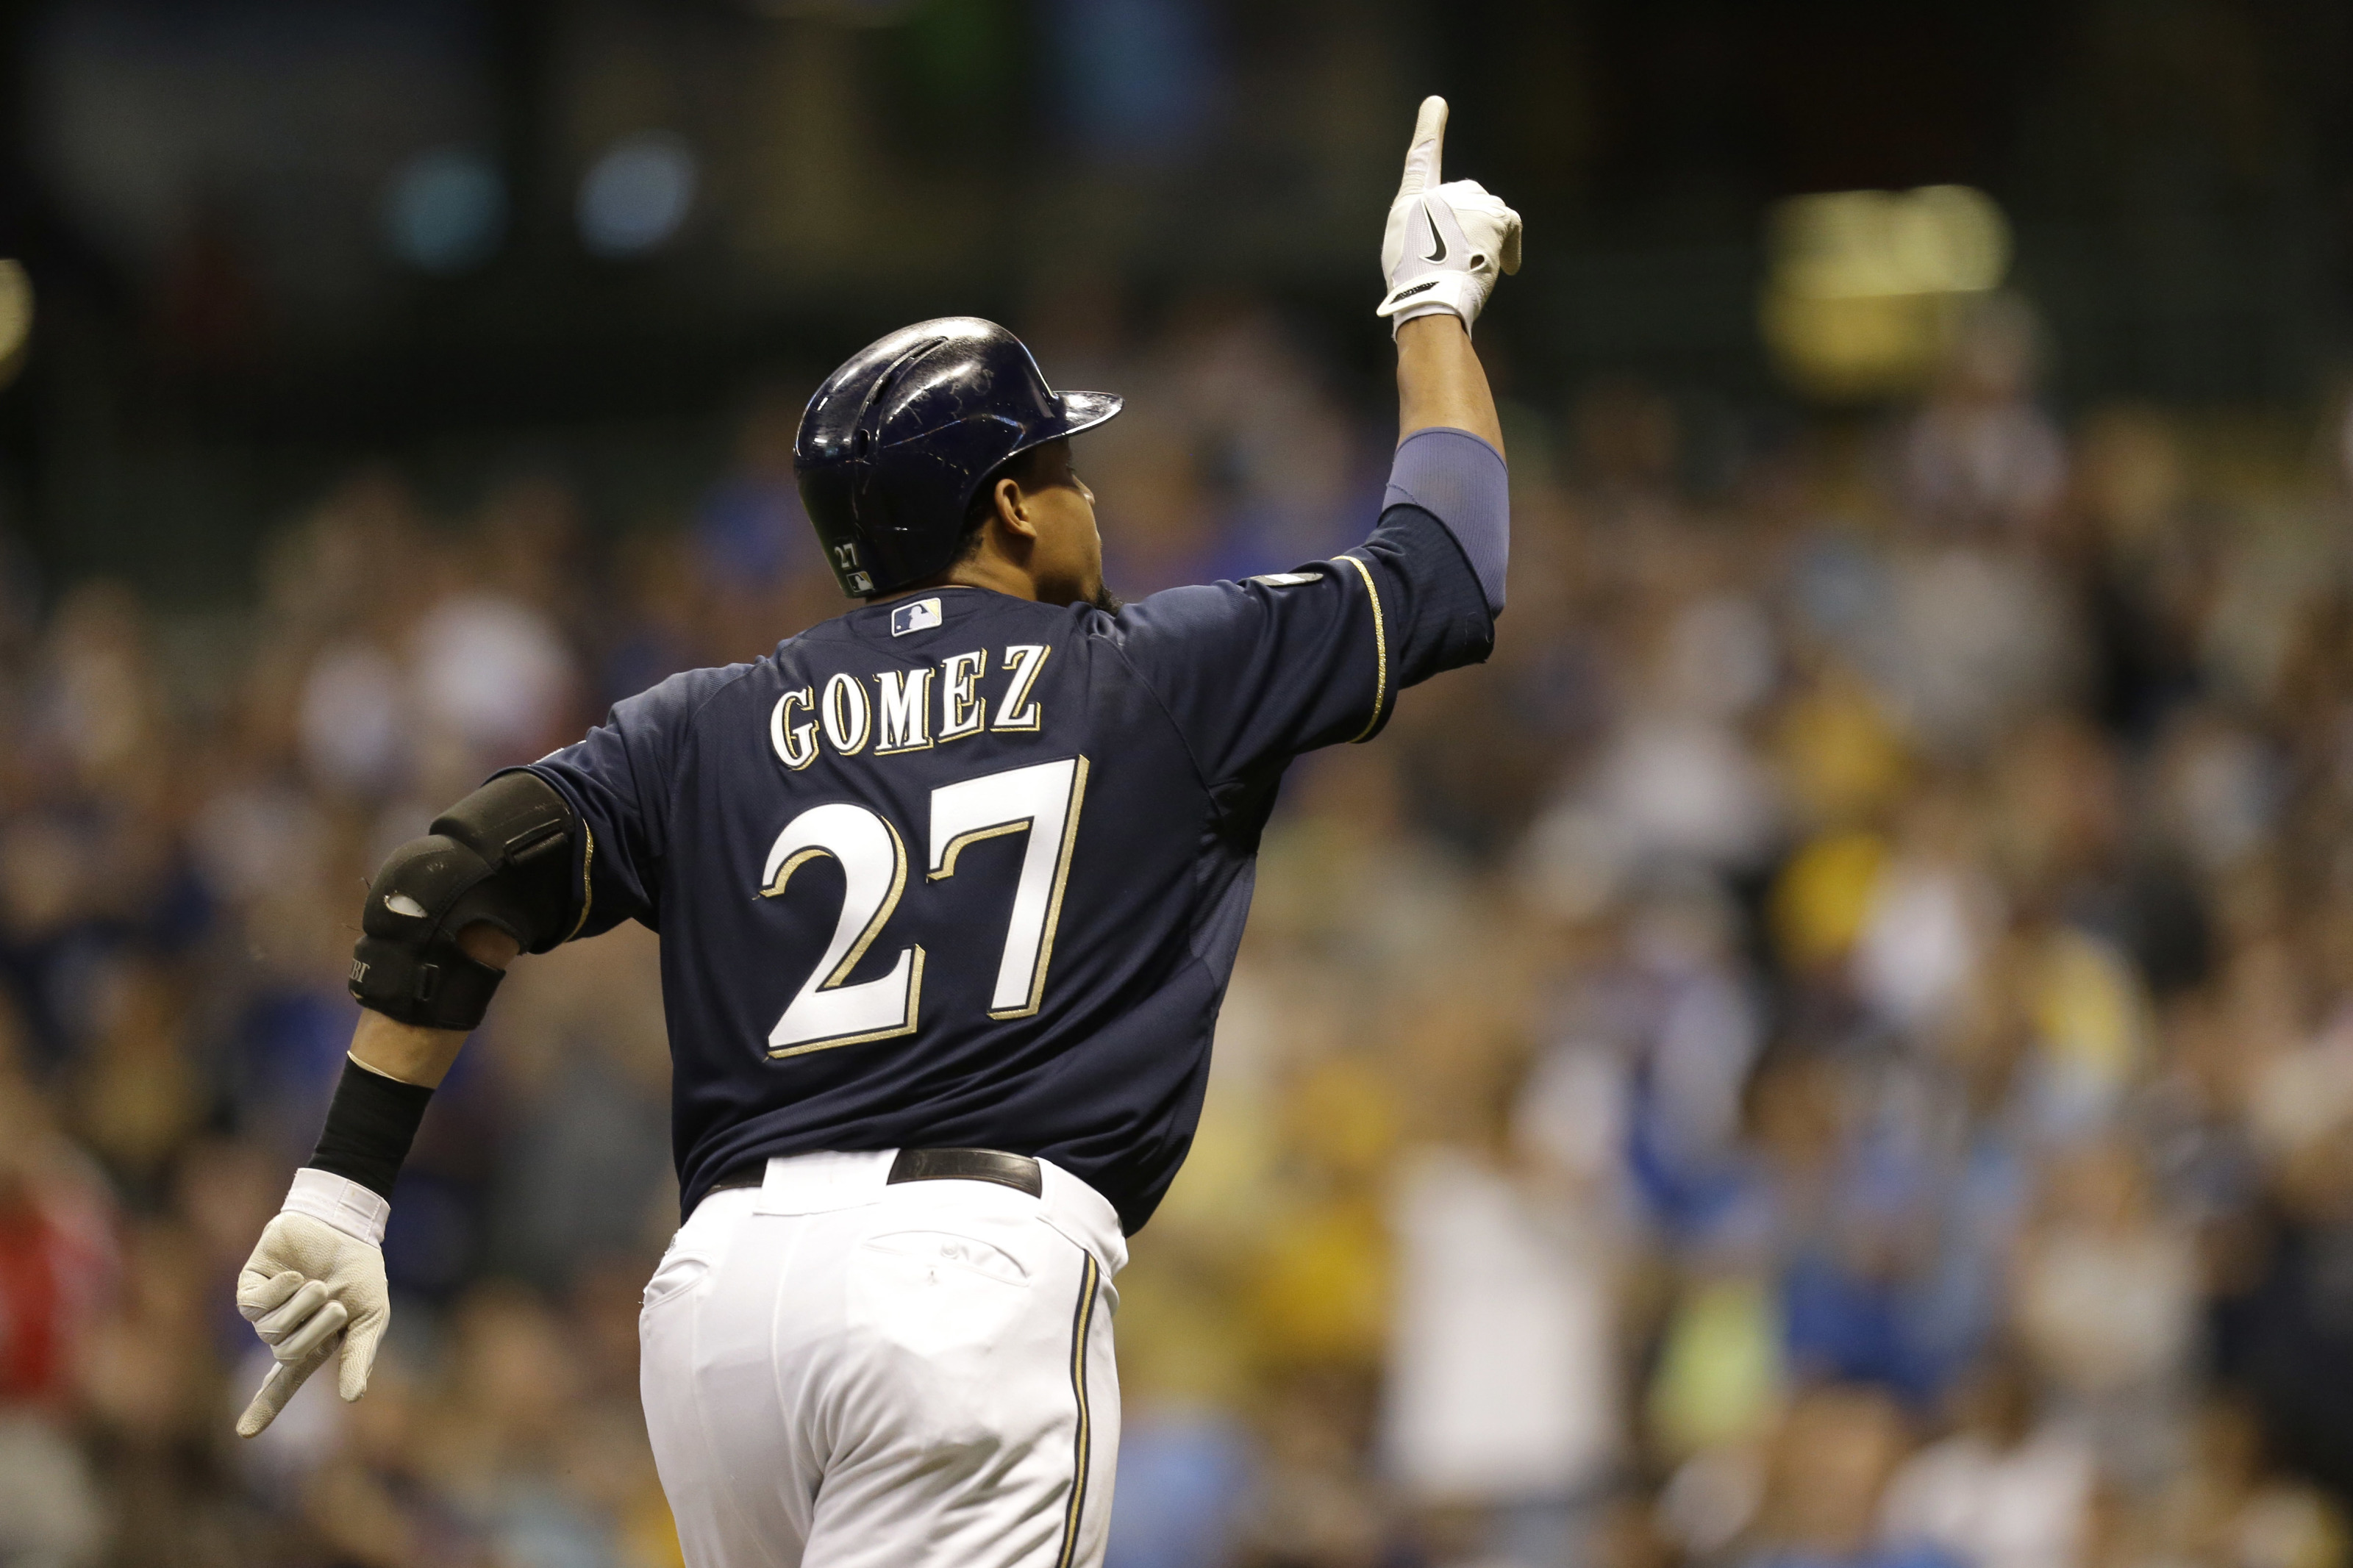 A fast start for Gomez in his Brewers debut